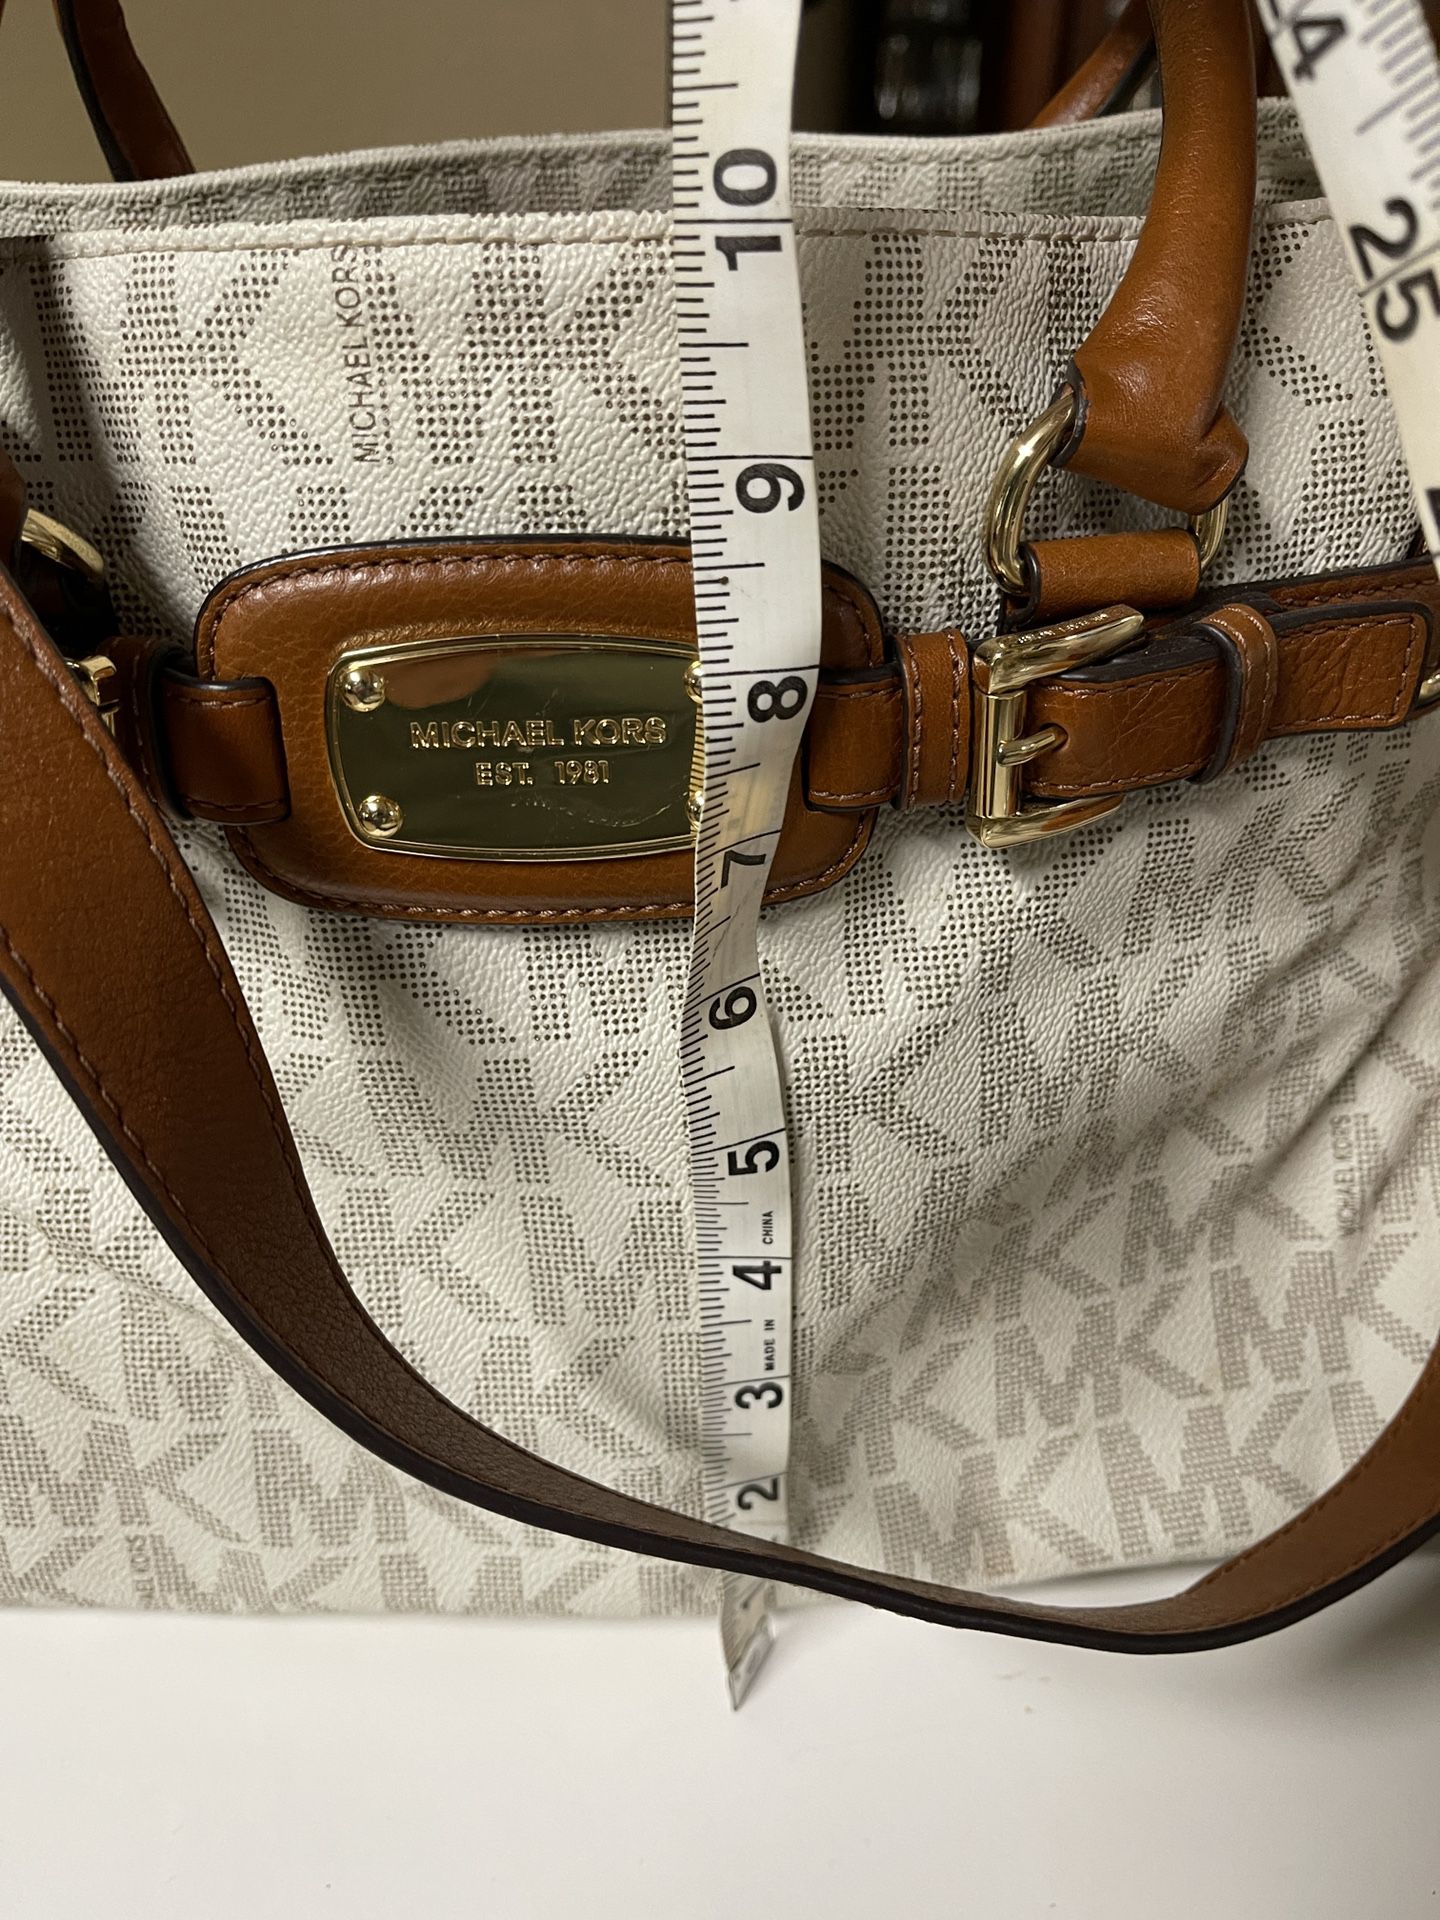 Michael Kors MK Kenly Large Logo Tote for Sale in Waco, TX - OfferUp